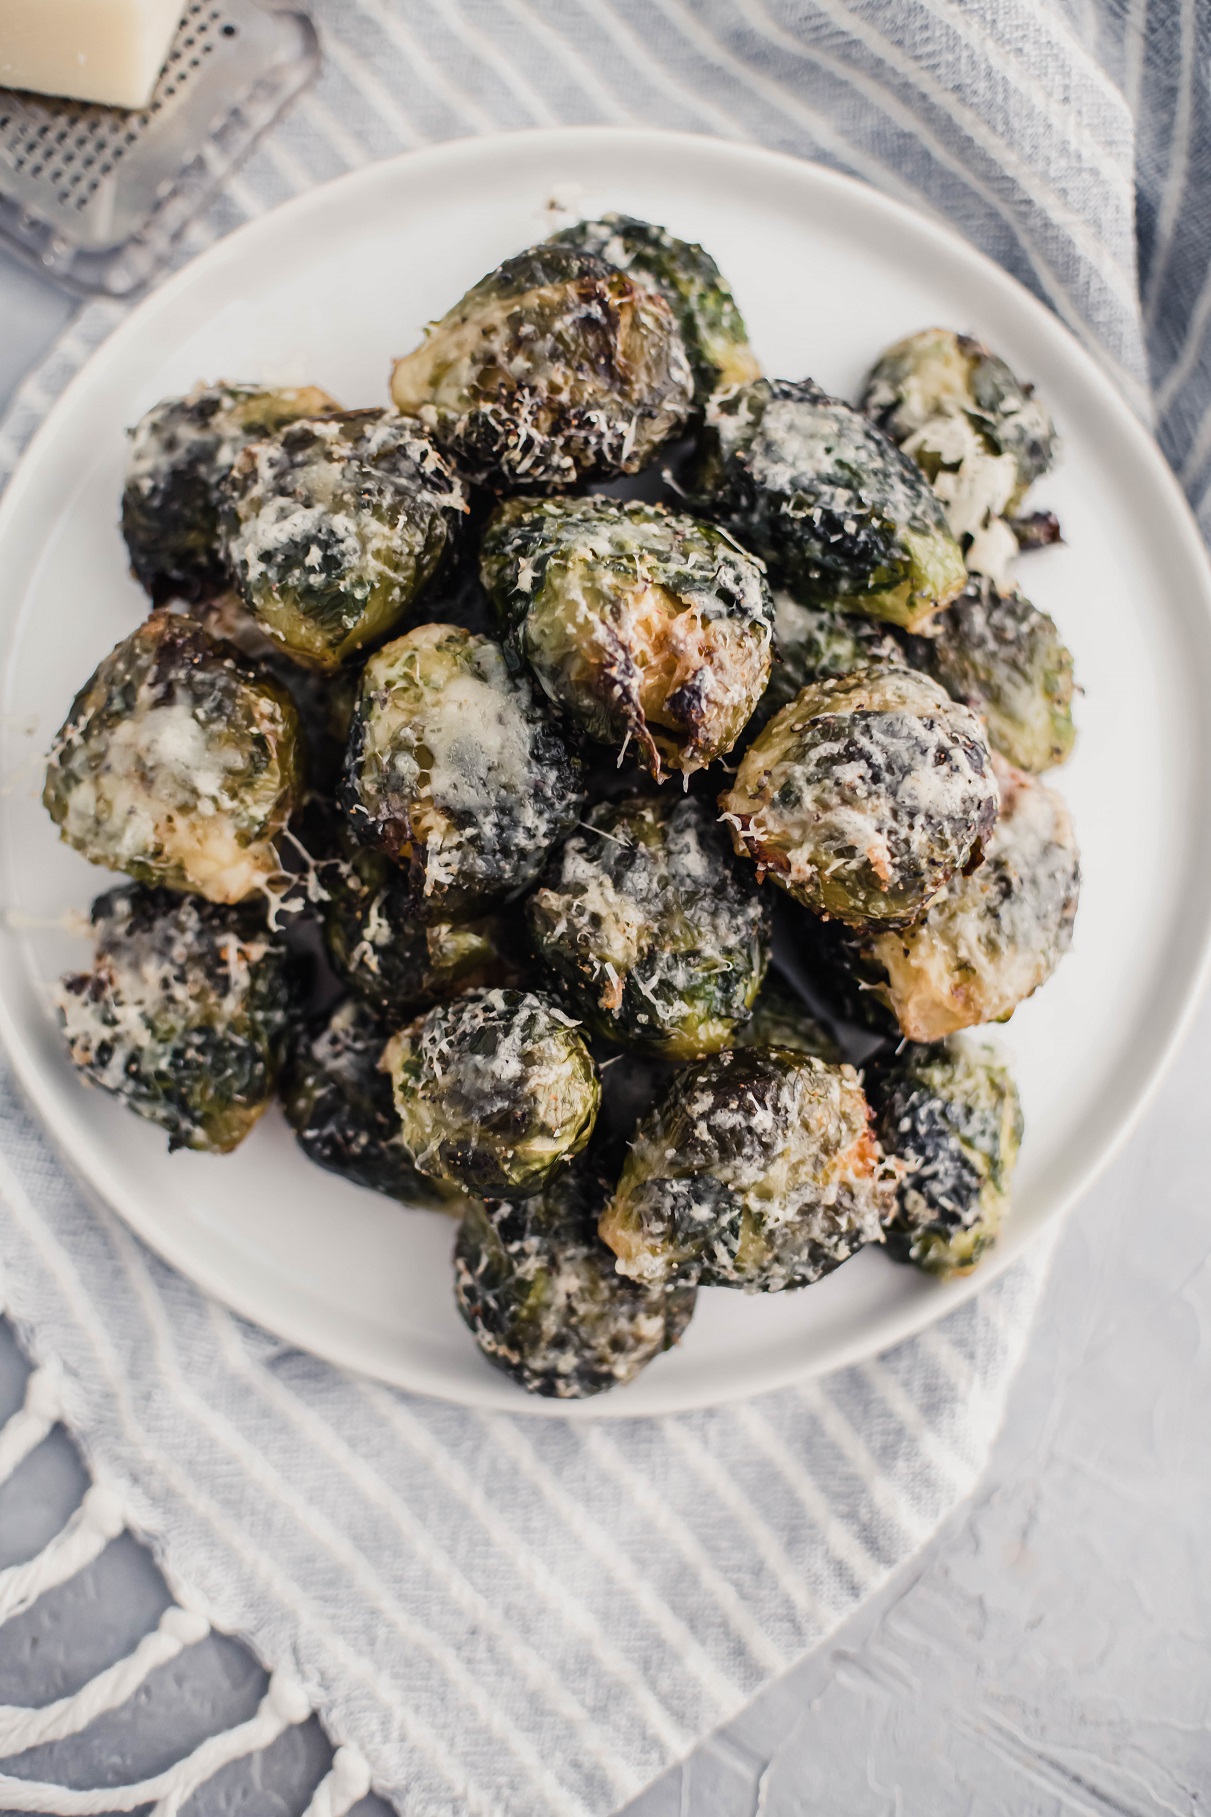 Get ready for Thanksgiving with this new delicious side dish, Parmesan Smashed Brussels Sprouts. They are extra crispy and super cheesy.